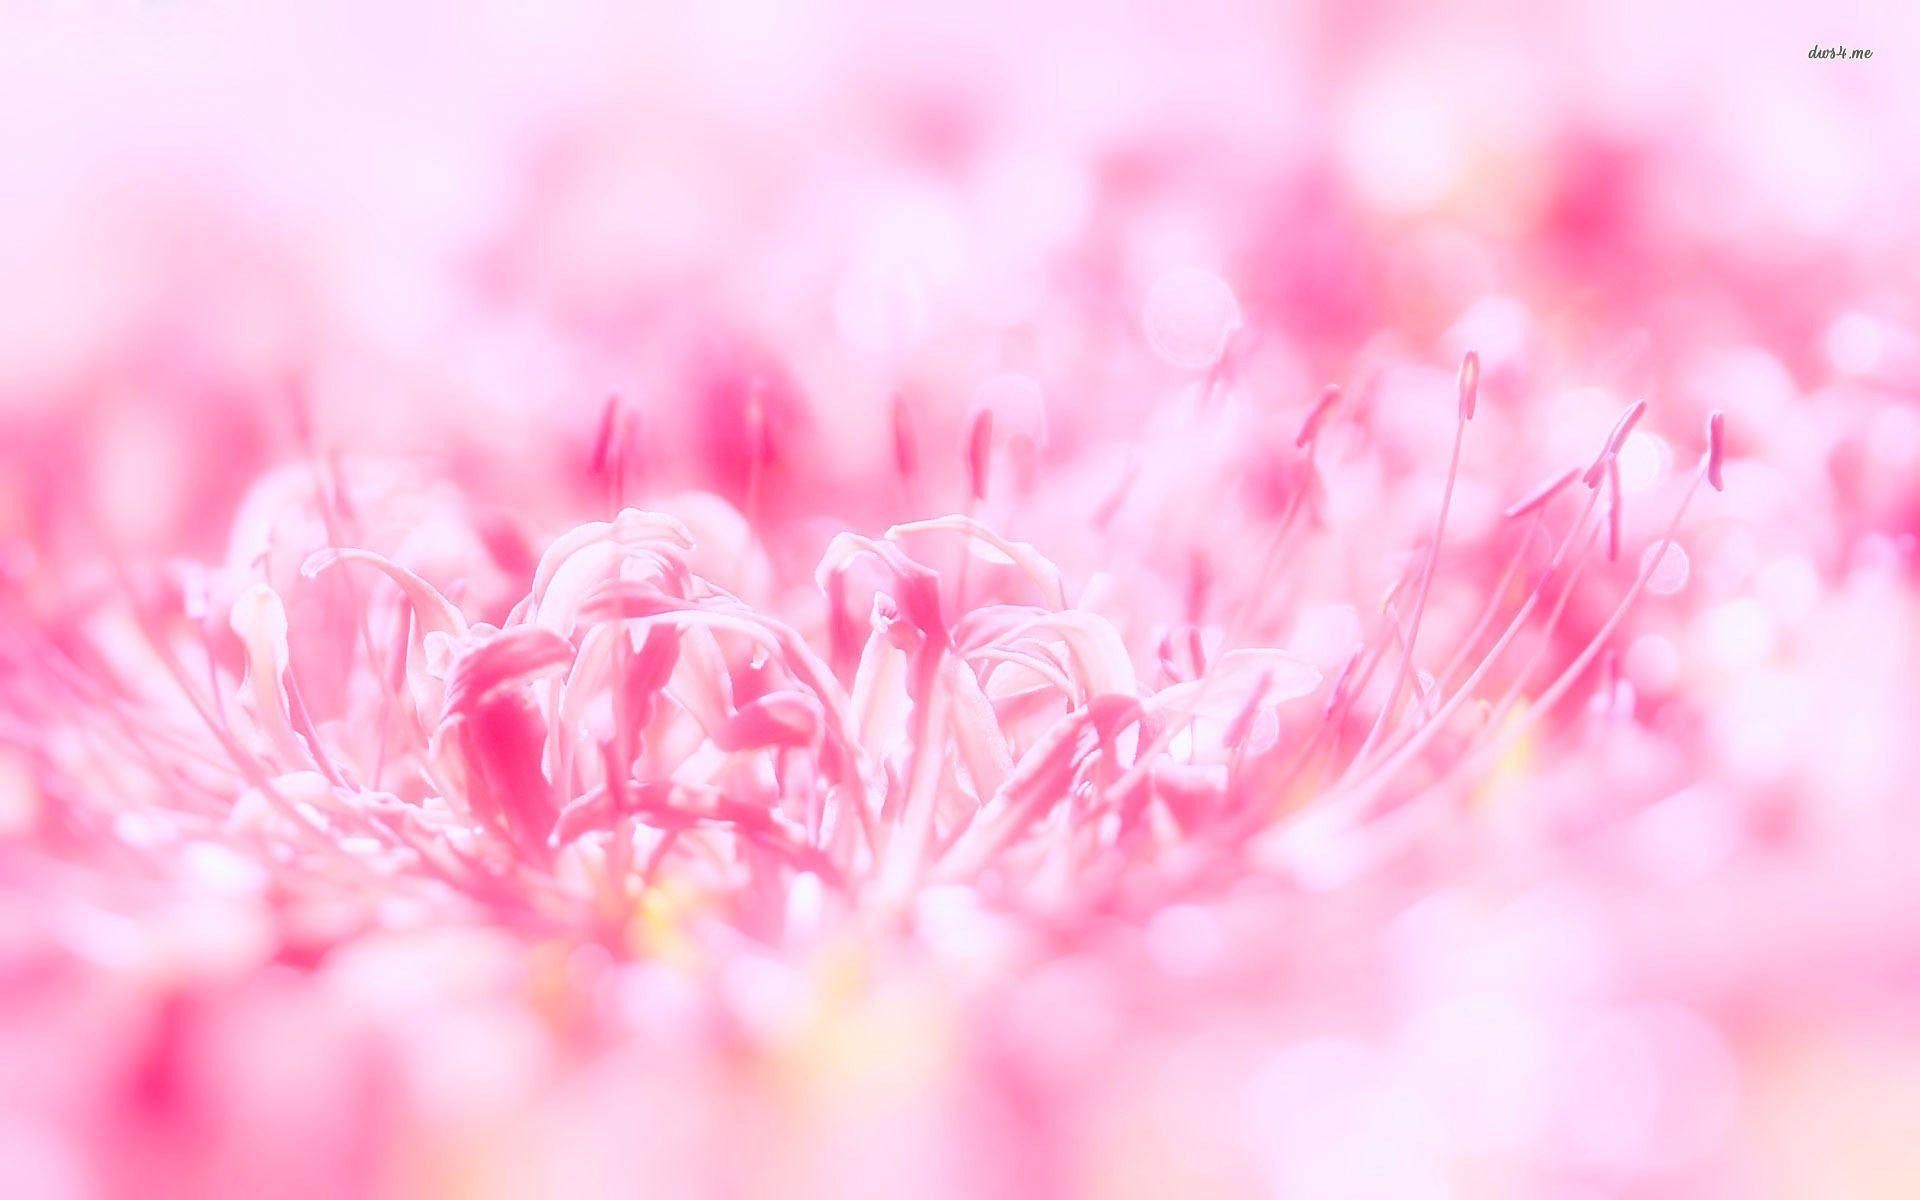 Small pink flower wallpaper 1920x1080 px - Small pink